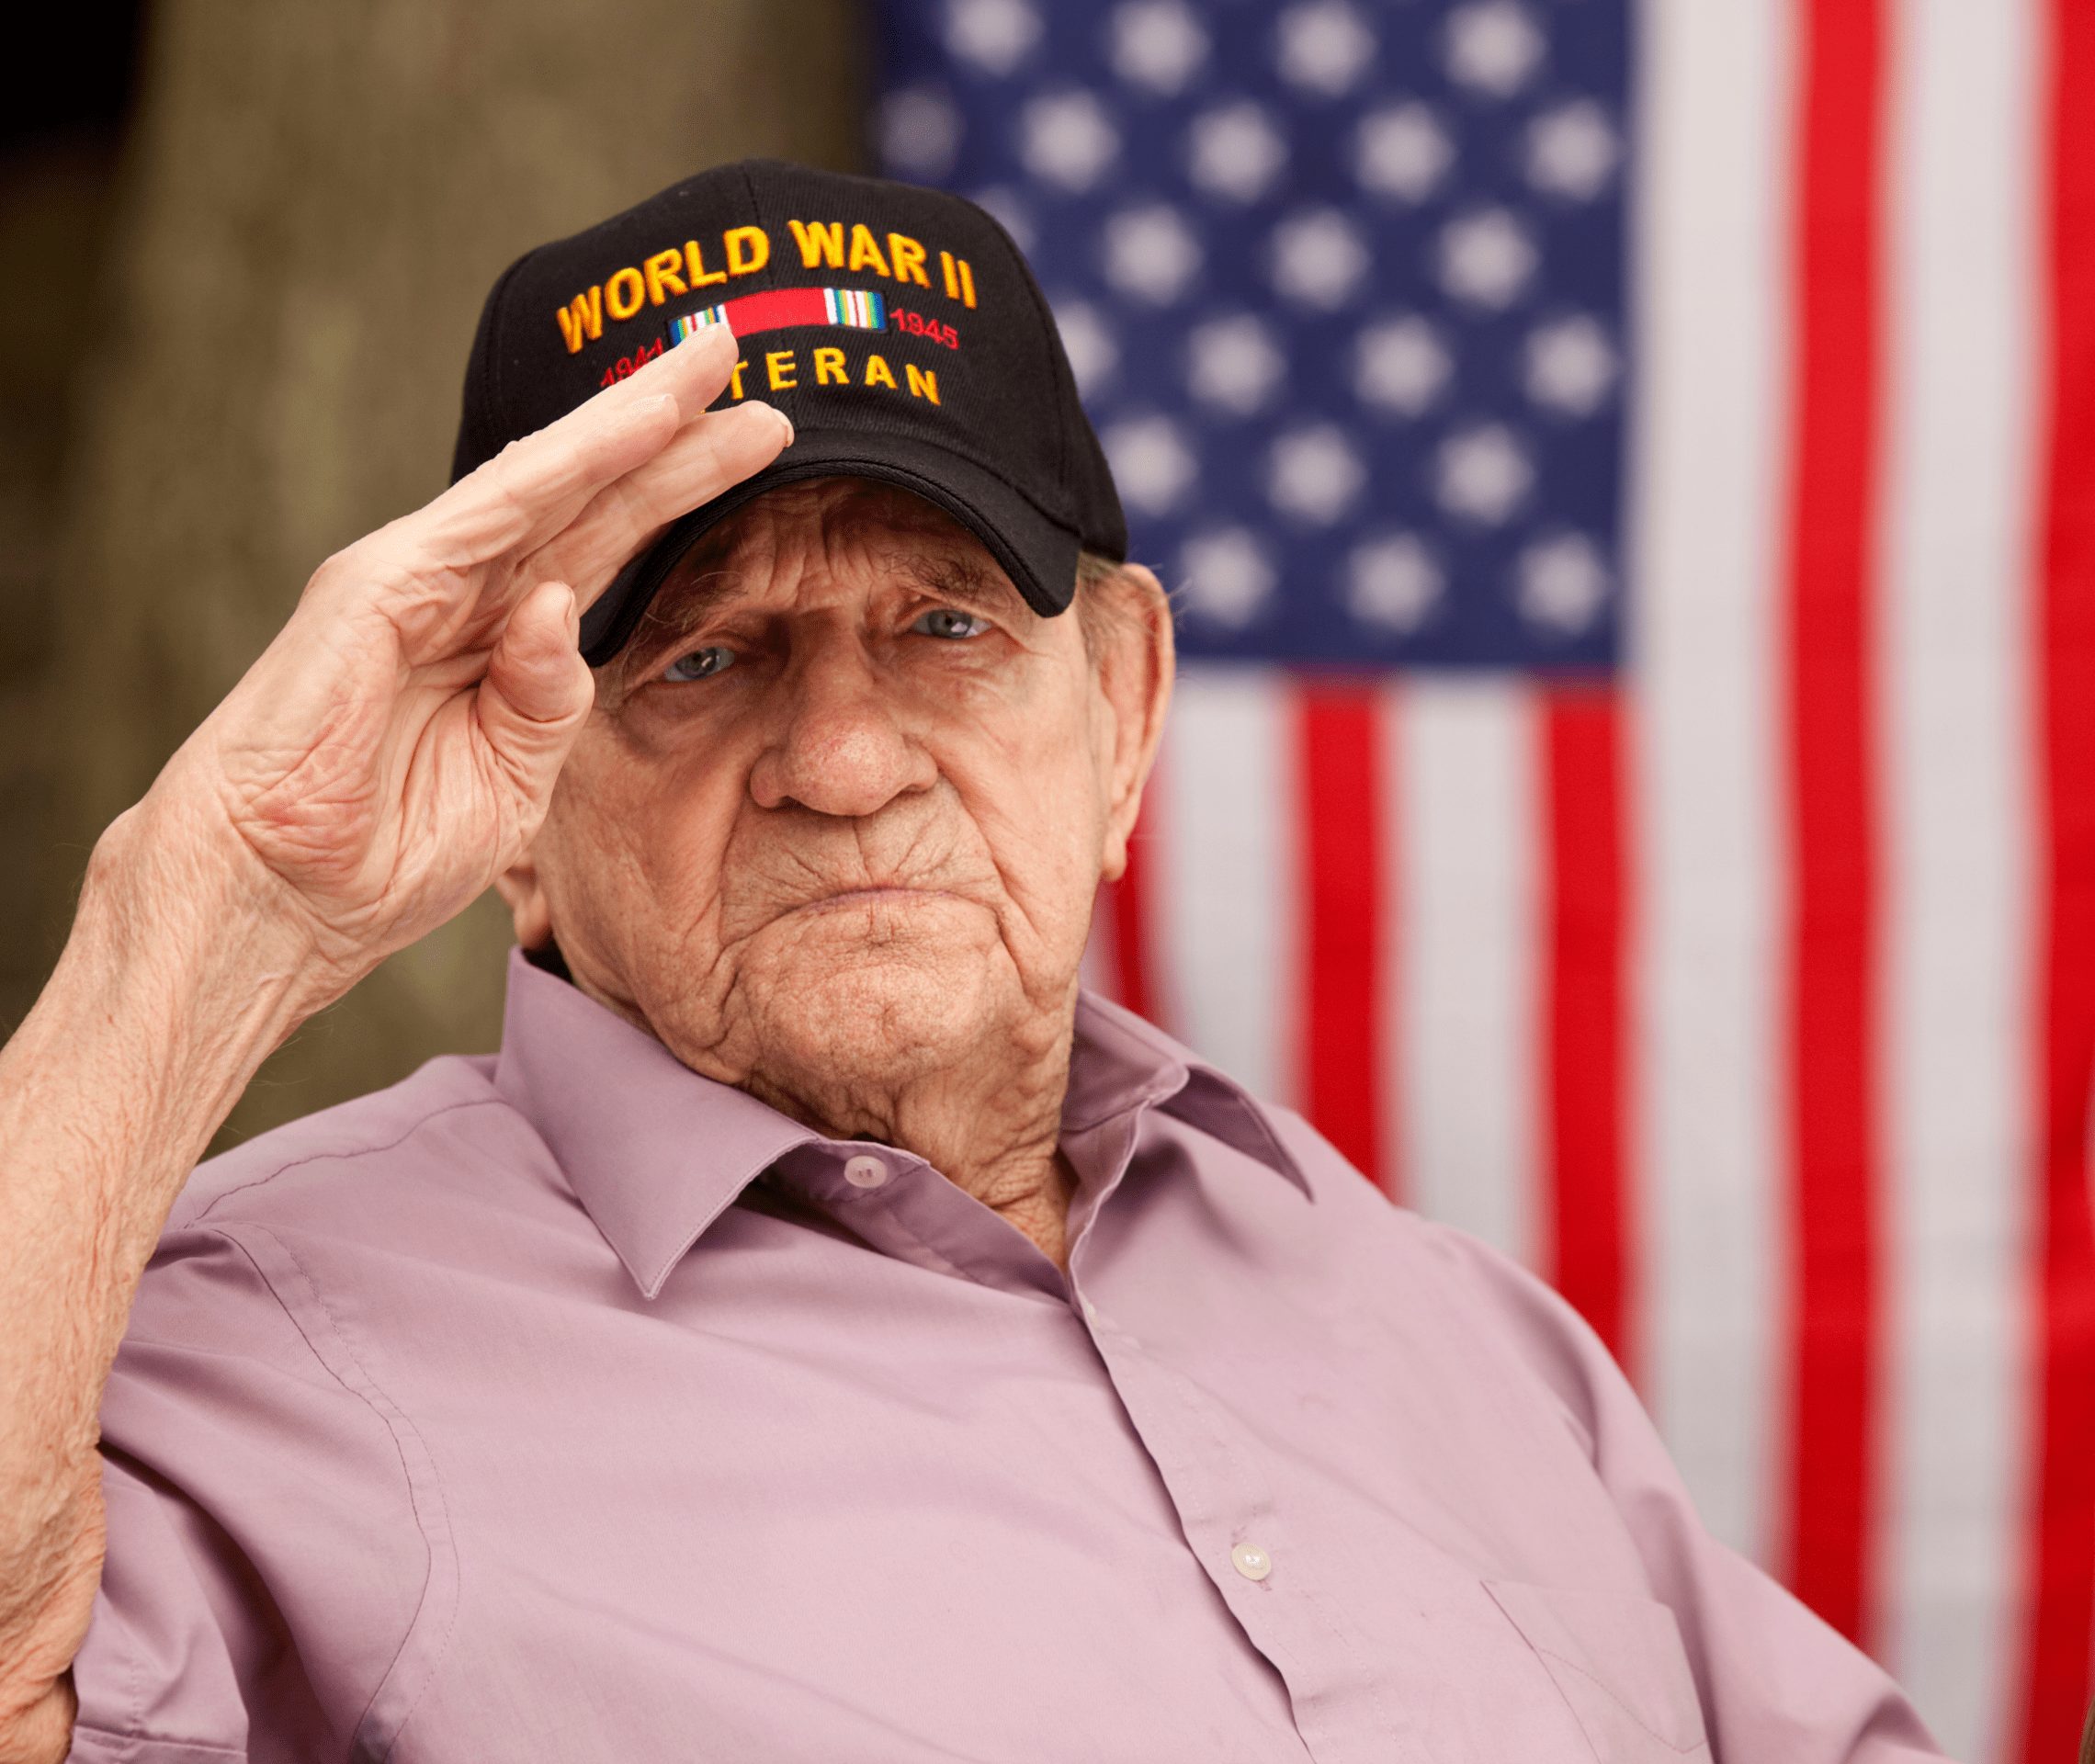 Can veterans benefits be used to pay for long-term senior care?